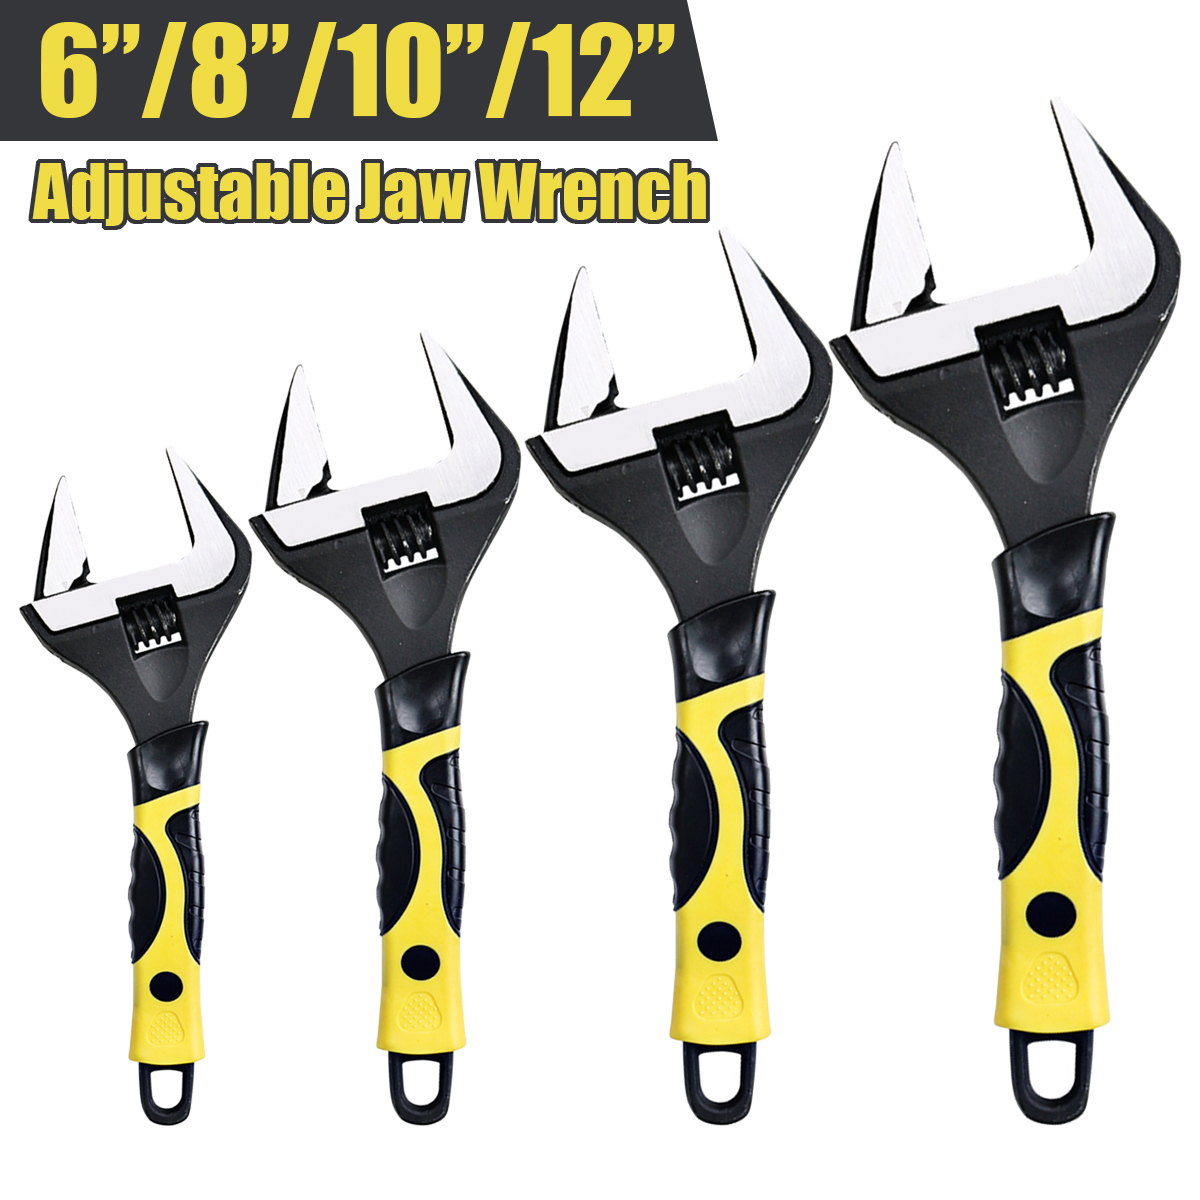 Large-Extra-Wide-Jaw-Adjustable-Spanner-Wrench-Openning-Capacity-Nut-Pipe-Tool-1766060-1